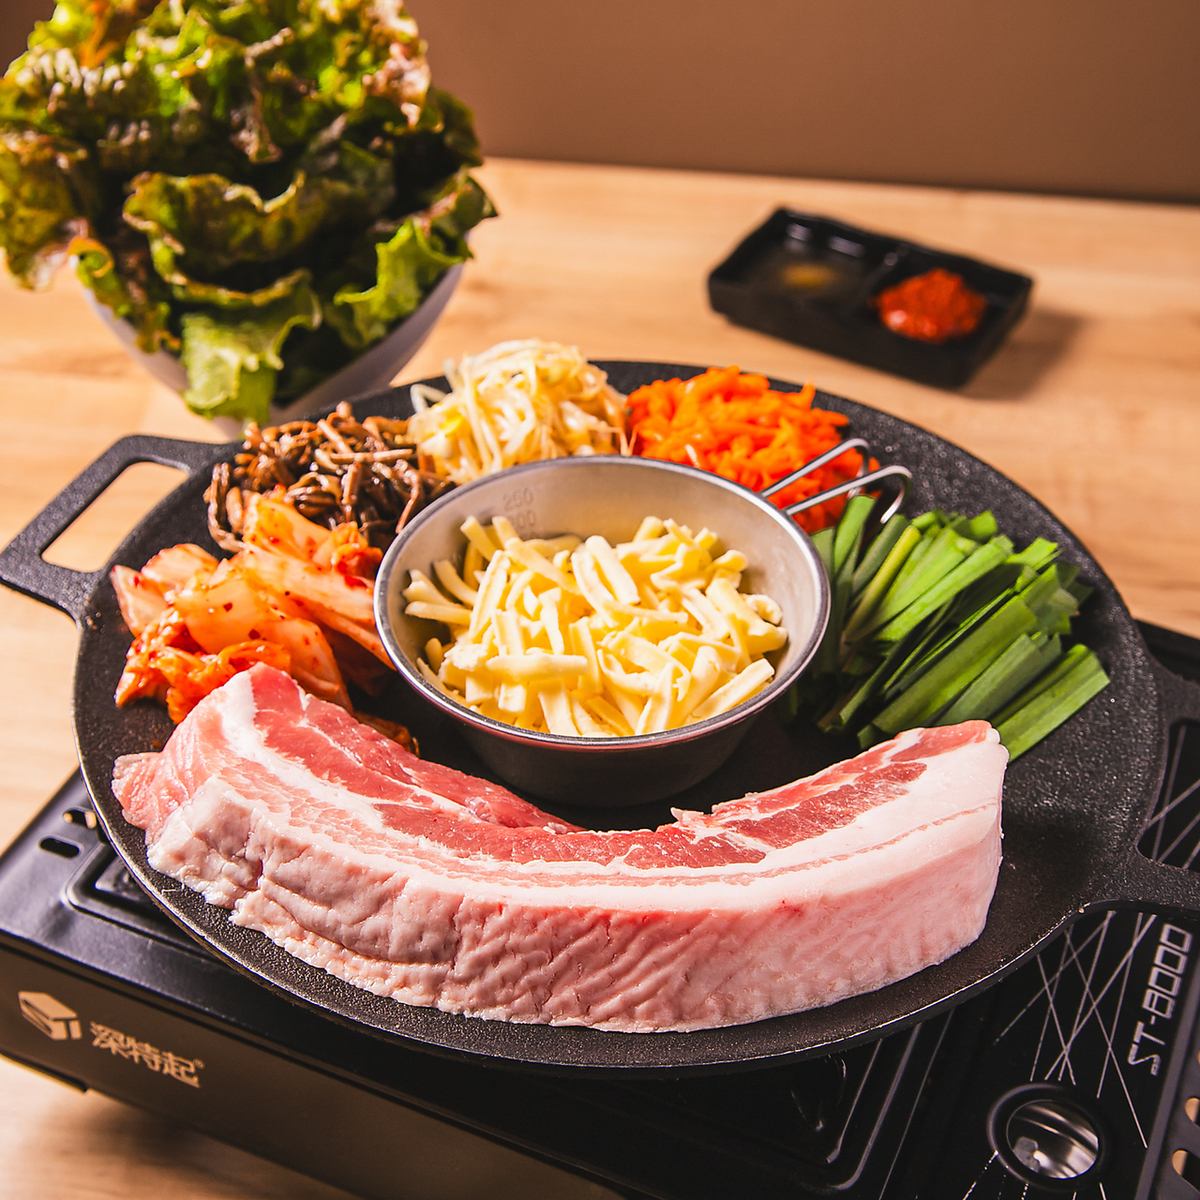 We offer a wide variety of authentic Korean cuisine!